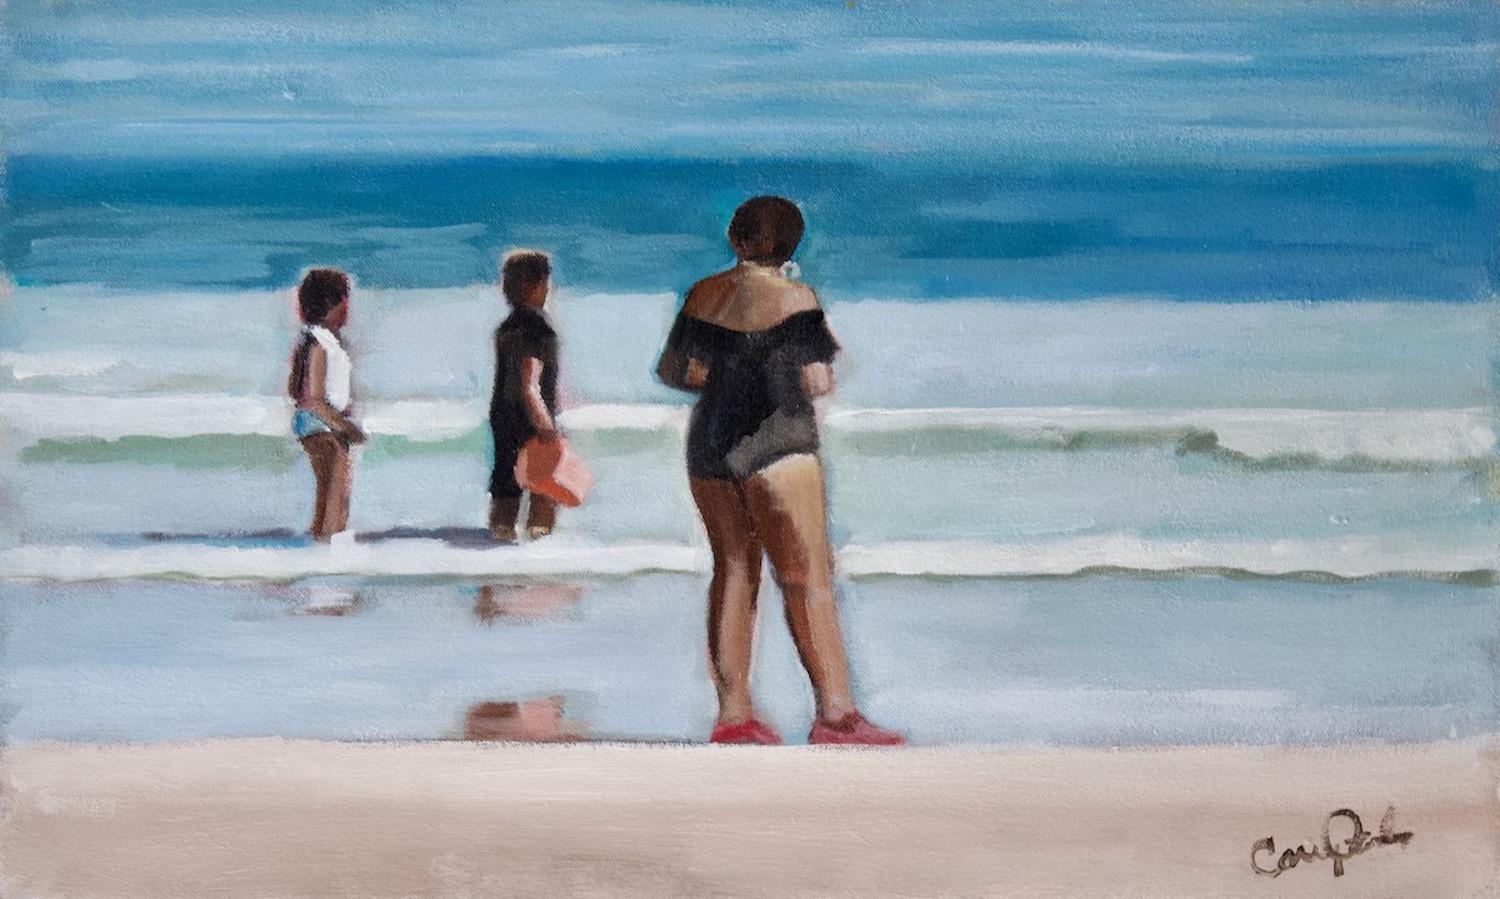 Waiting for the Waves, Original Painting